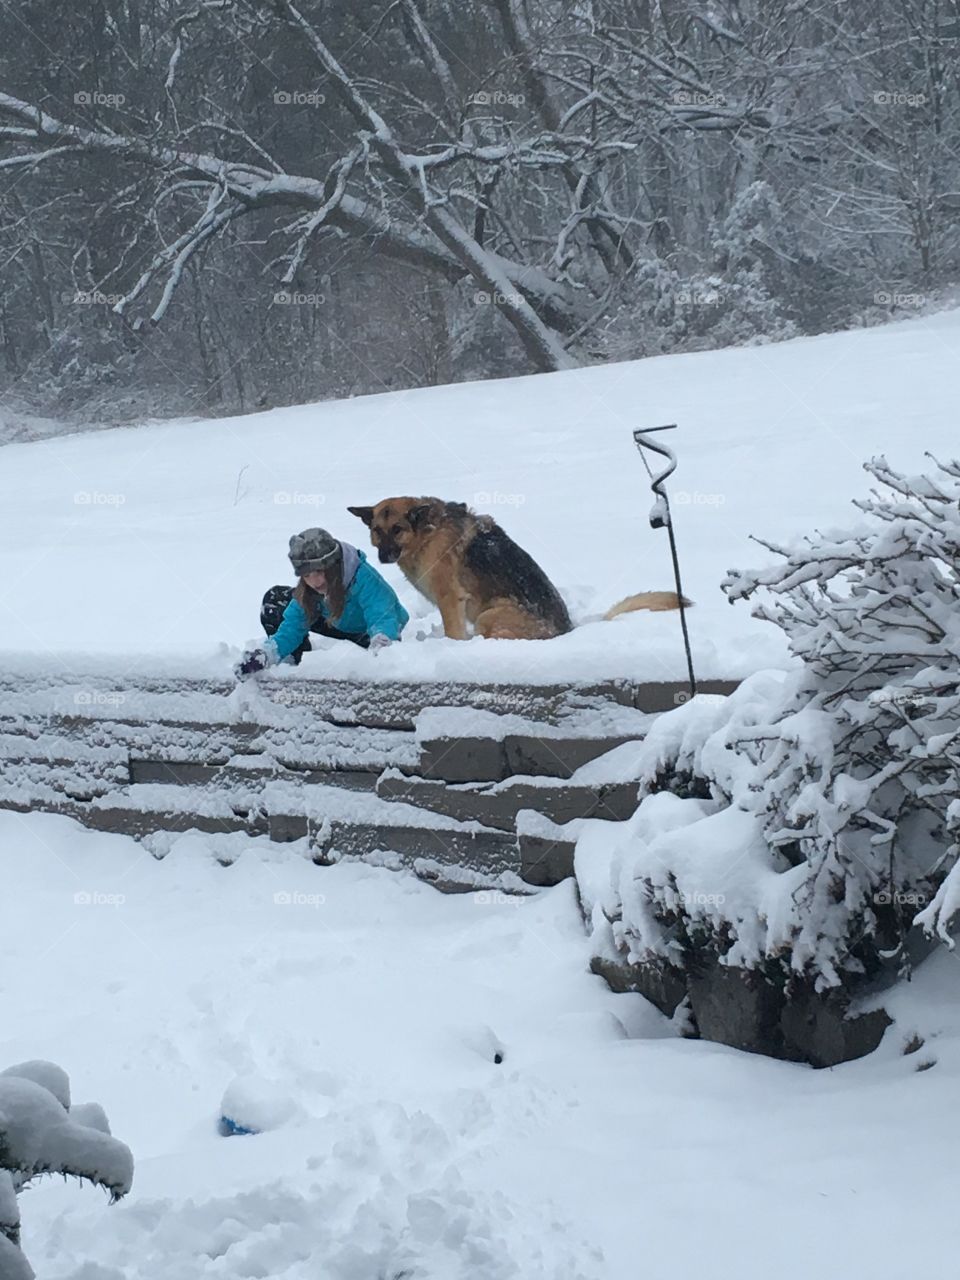 Girl playing in snow with brown dog